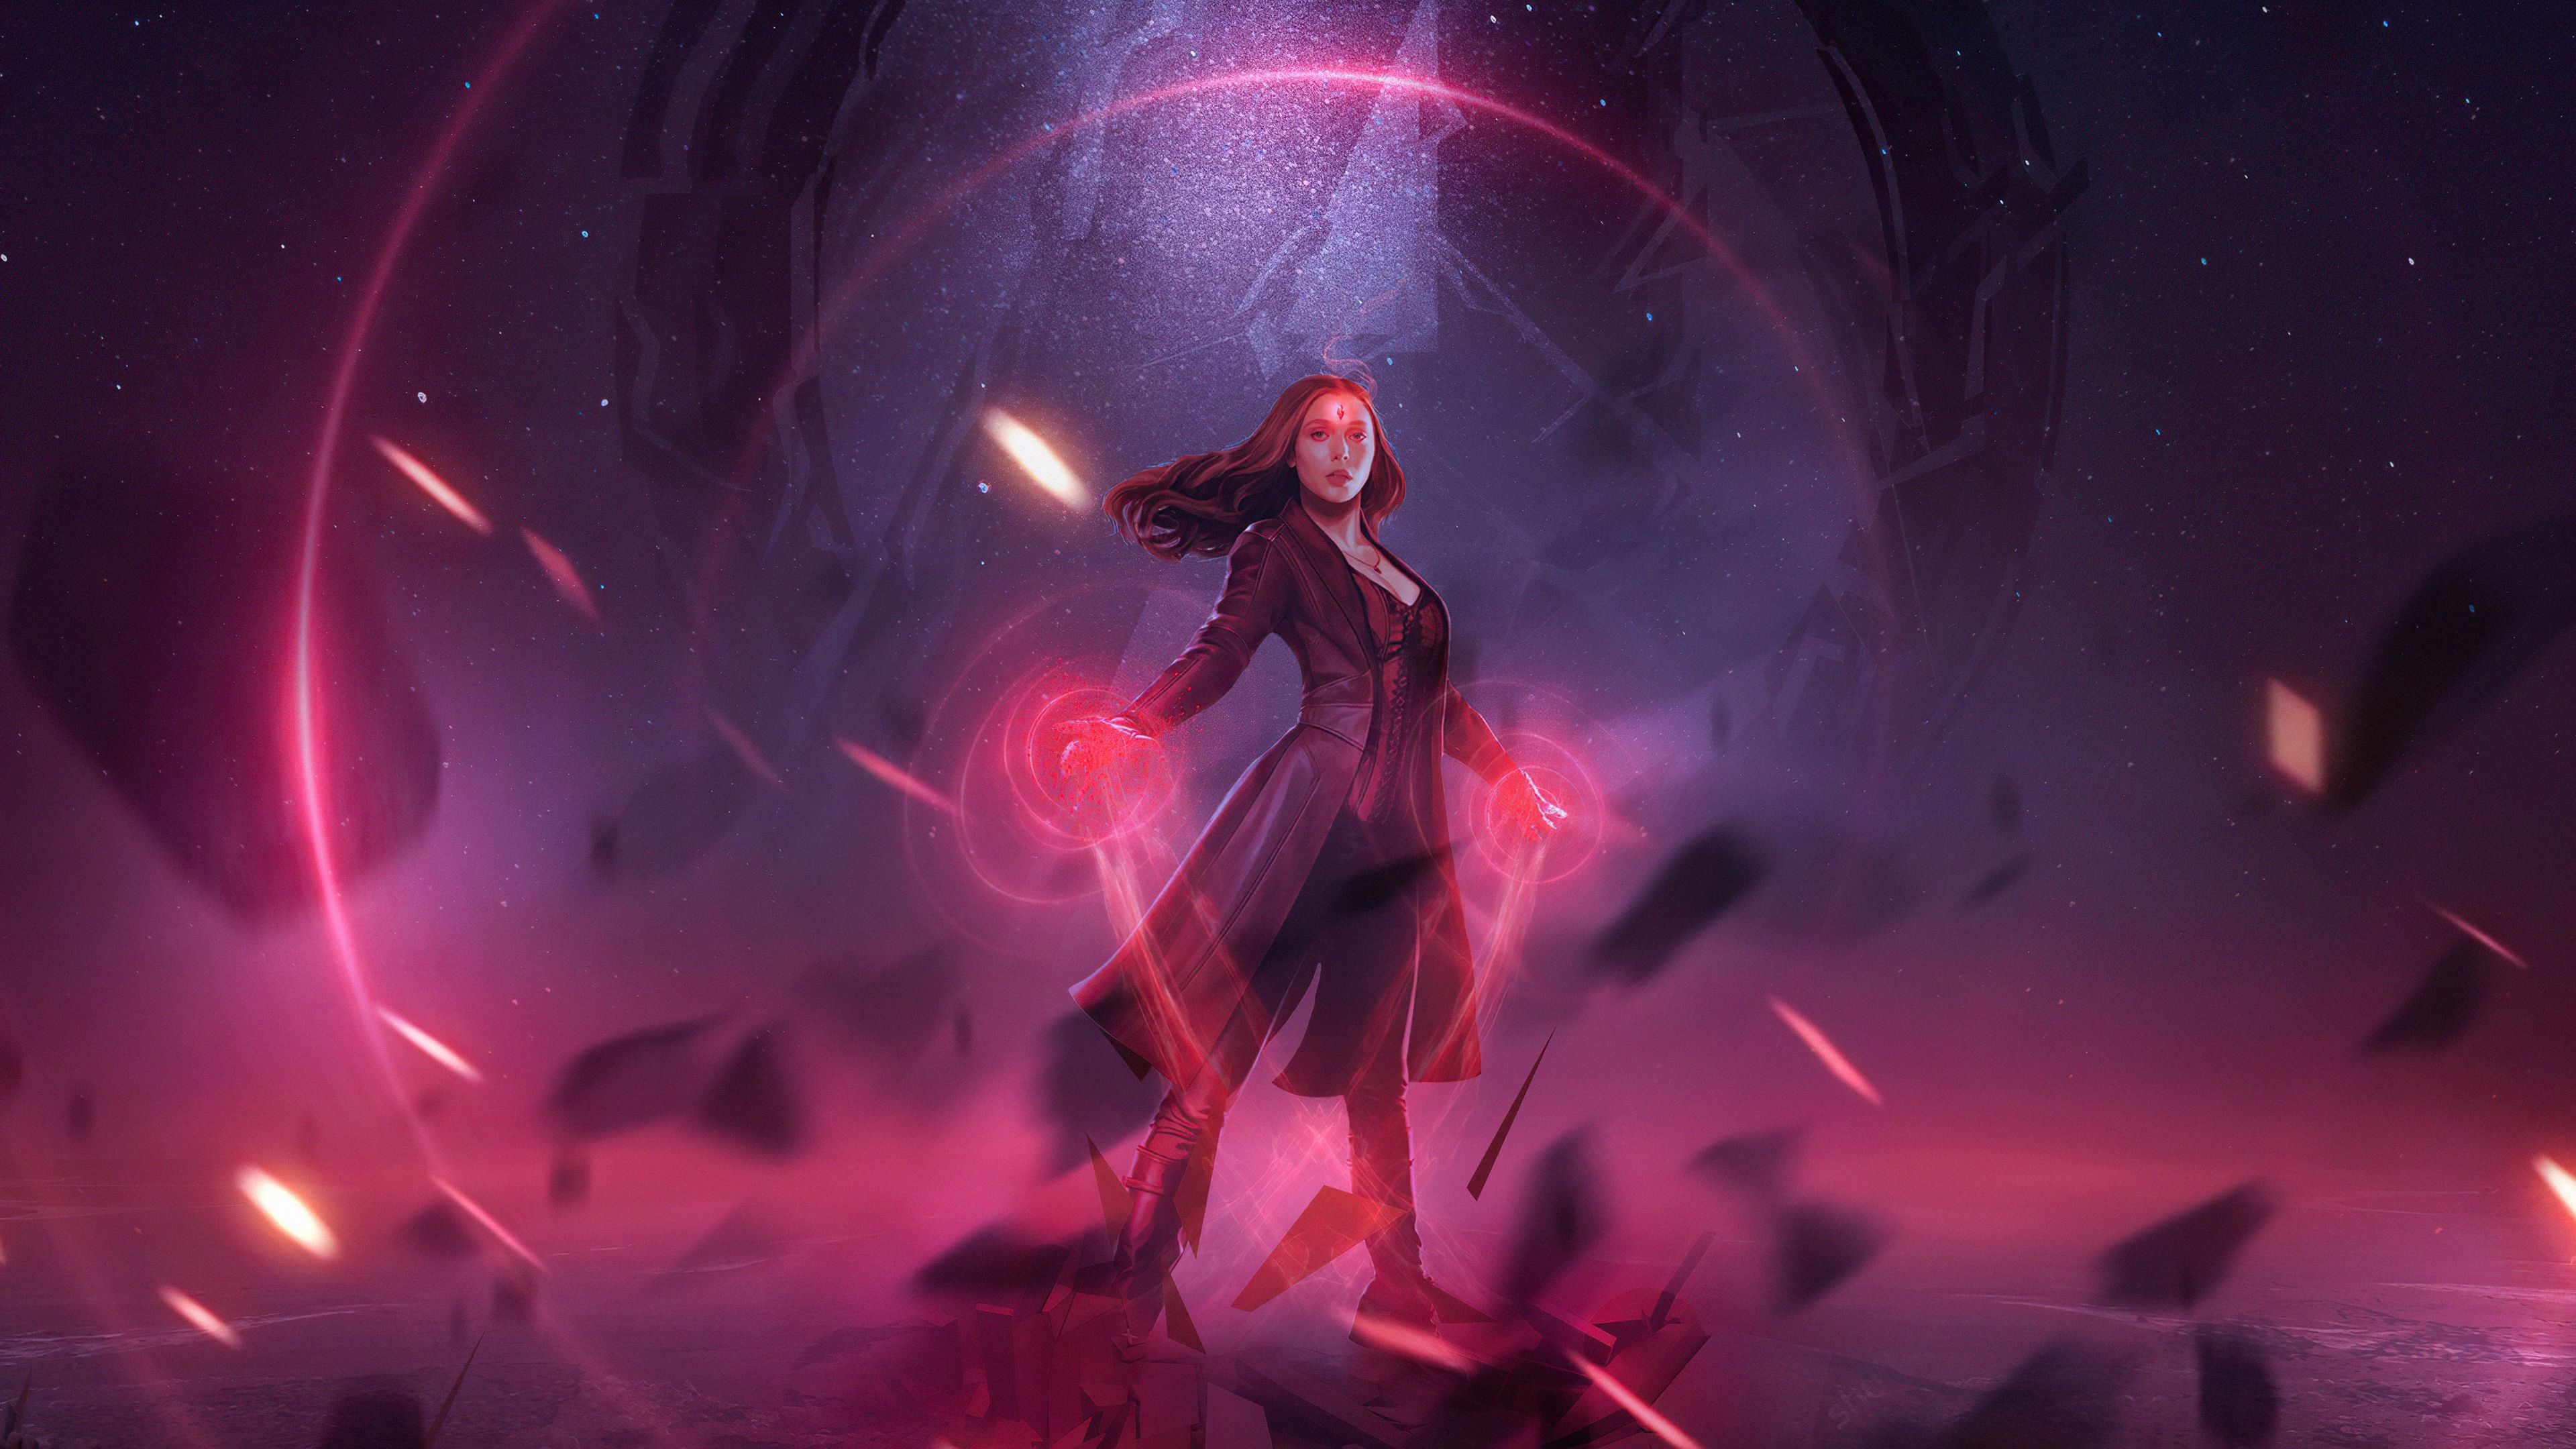 Power Of Scarlet Witch Wallpaper Full Credits To U